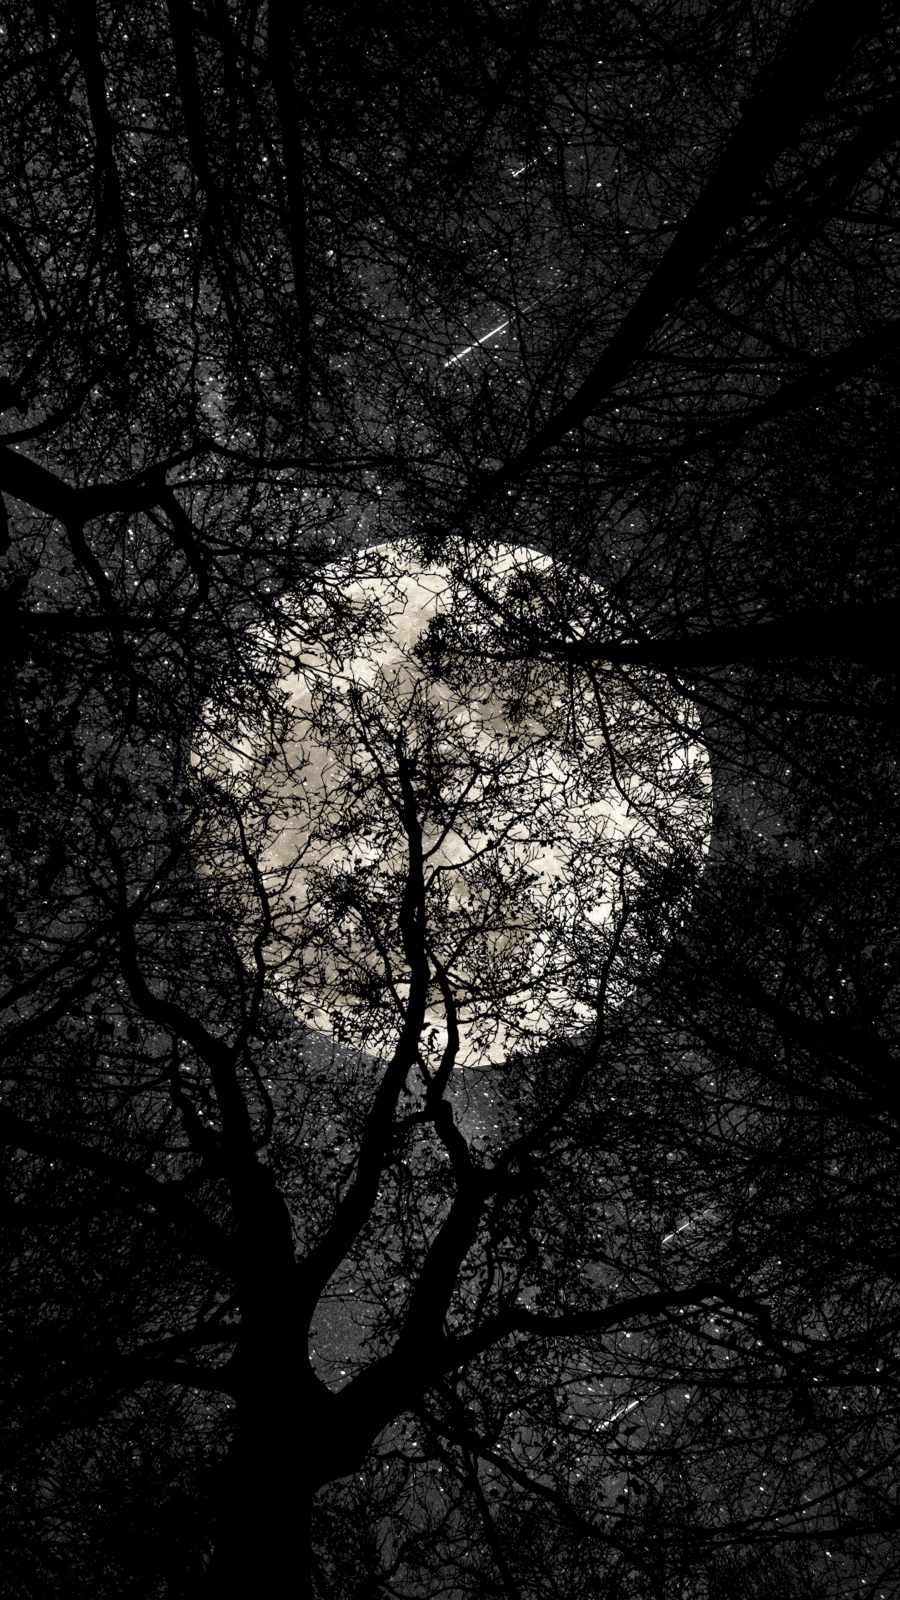 Full Moon Forest Wallpapers - Top Free Full Moon Forest Backgrounds ...